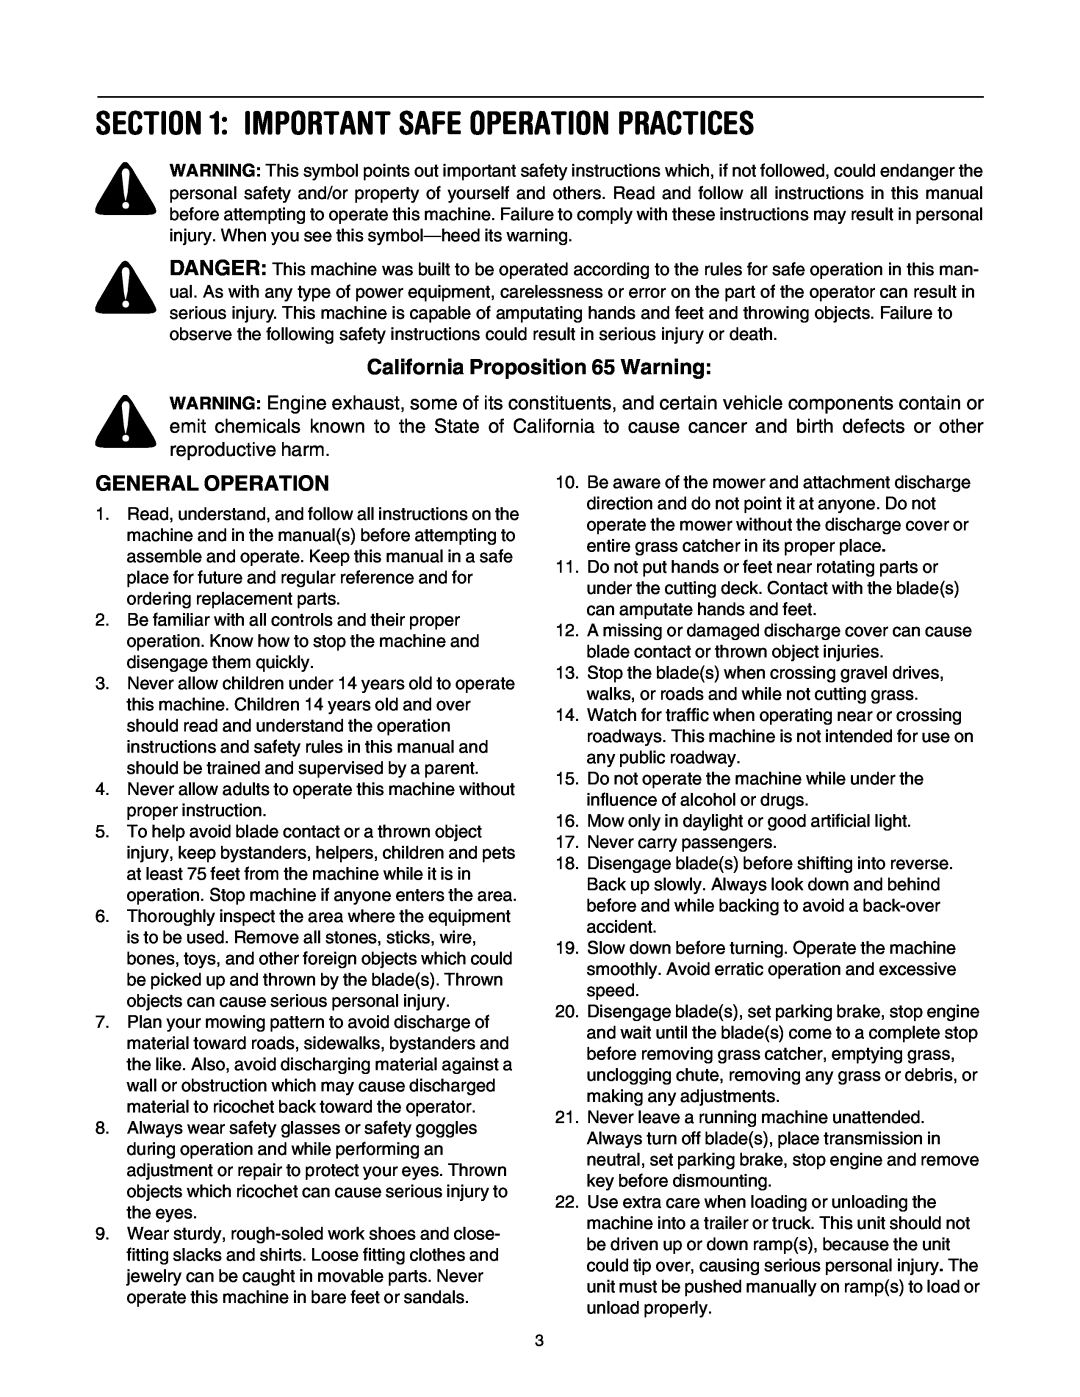 MTD Lawn Tracto manual Important Safe Operation Practices, California Proposition 65 Warning, General Operation 